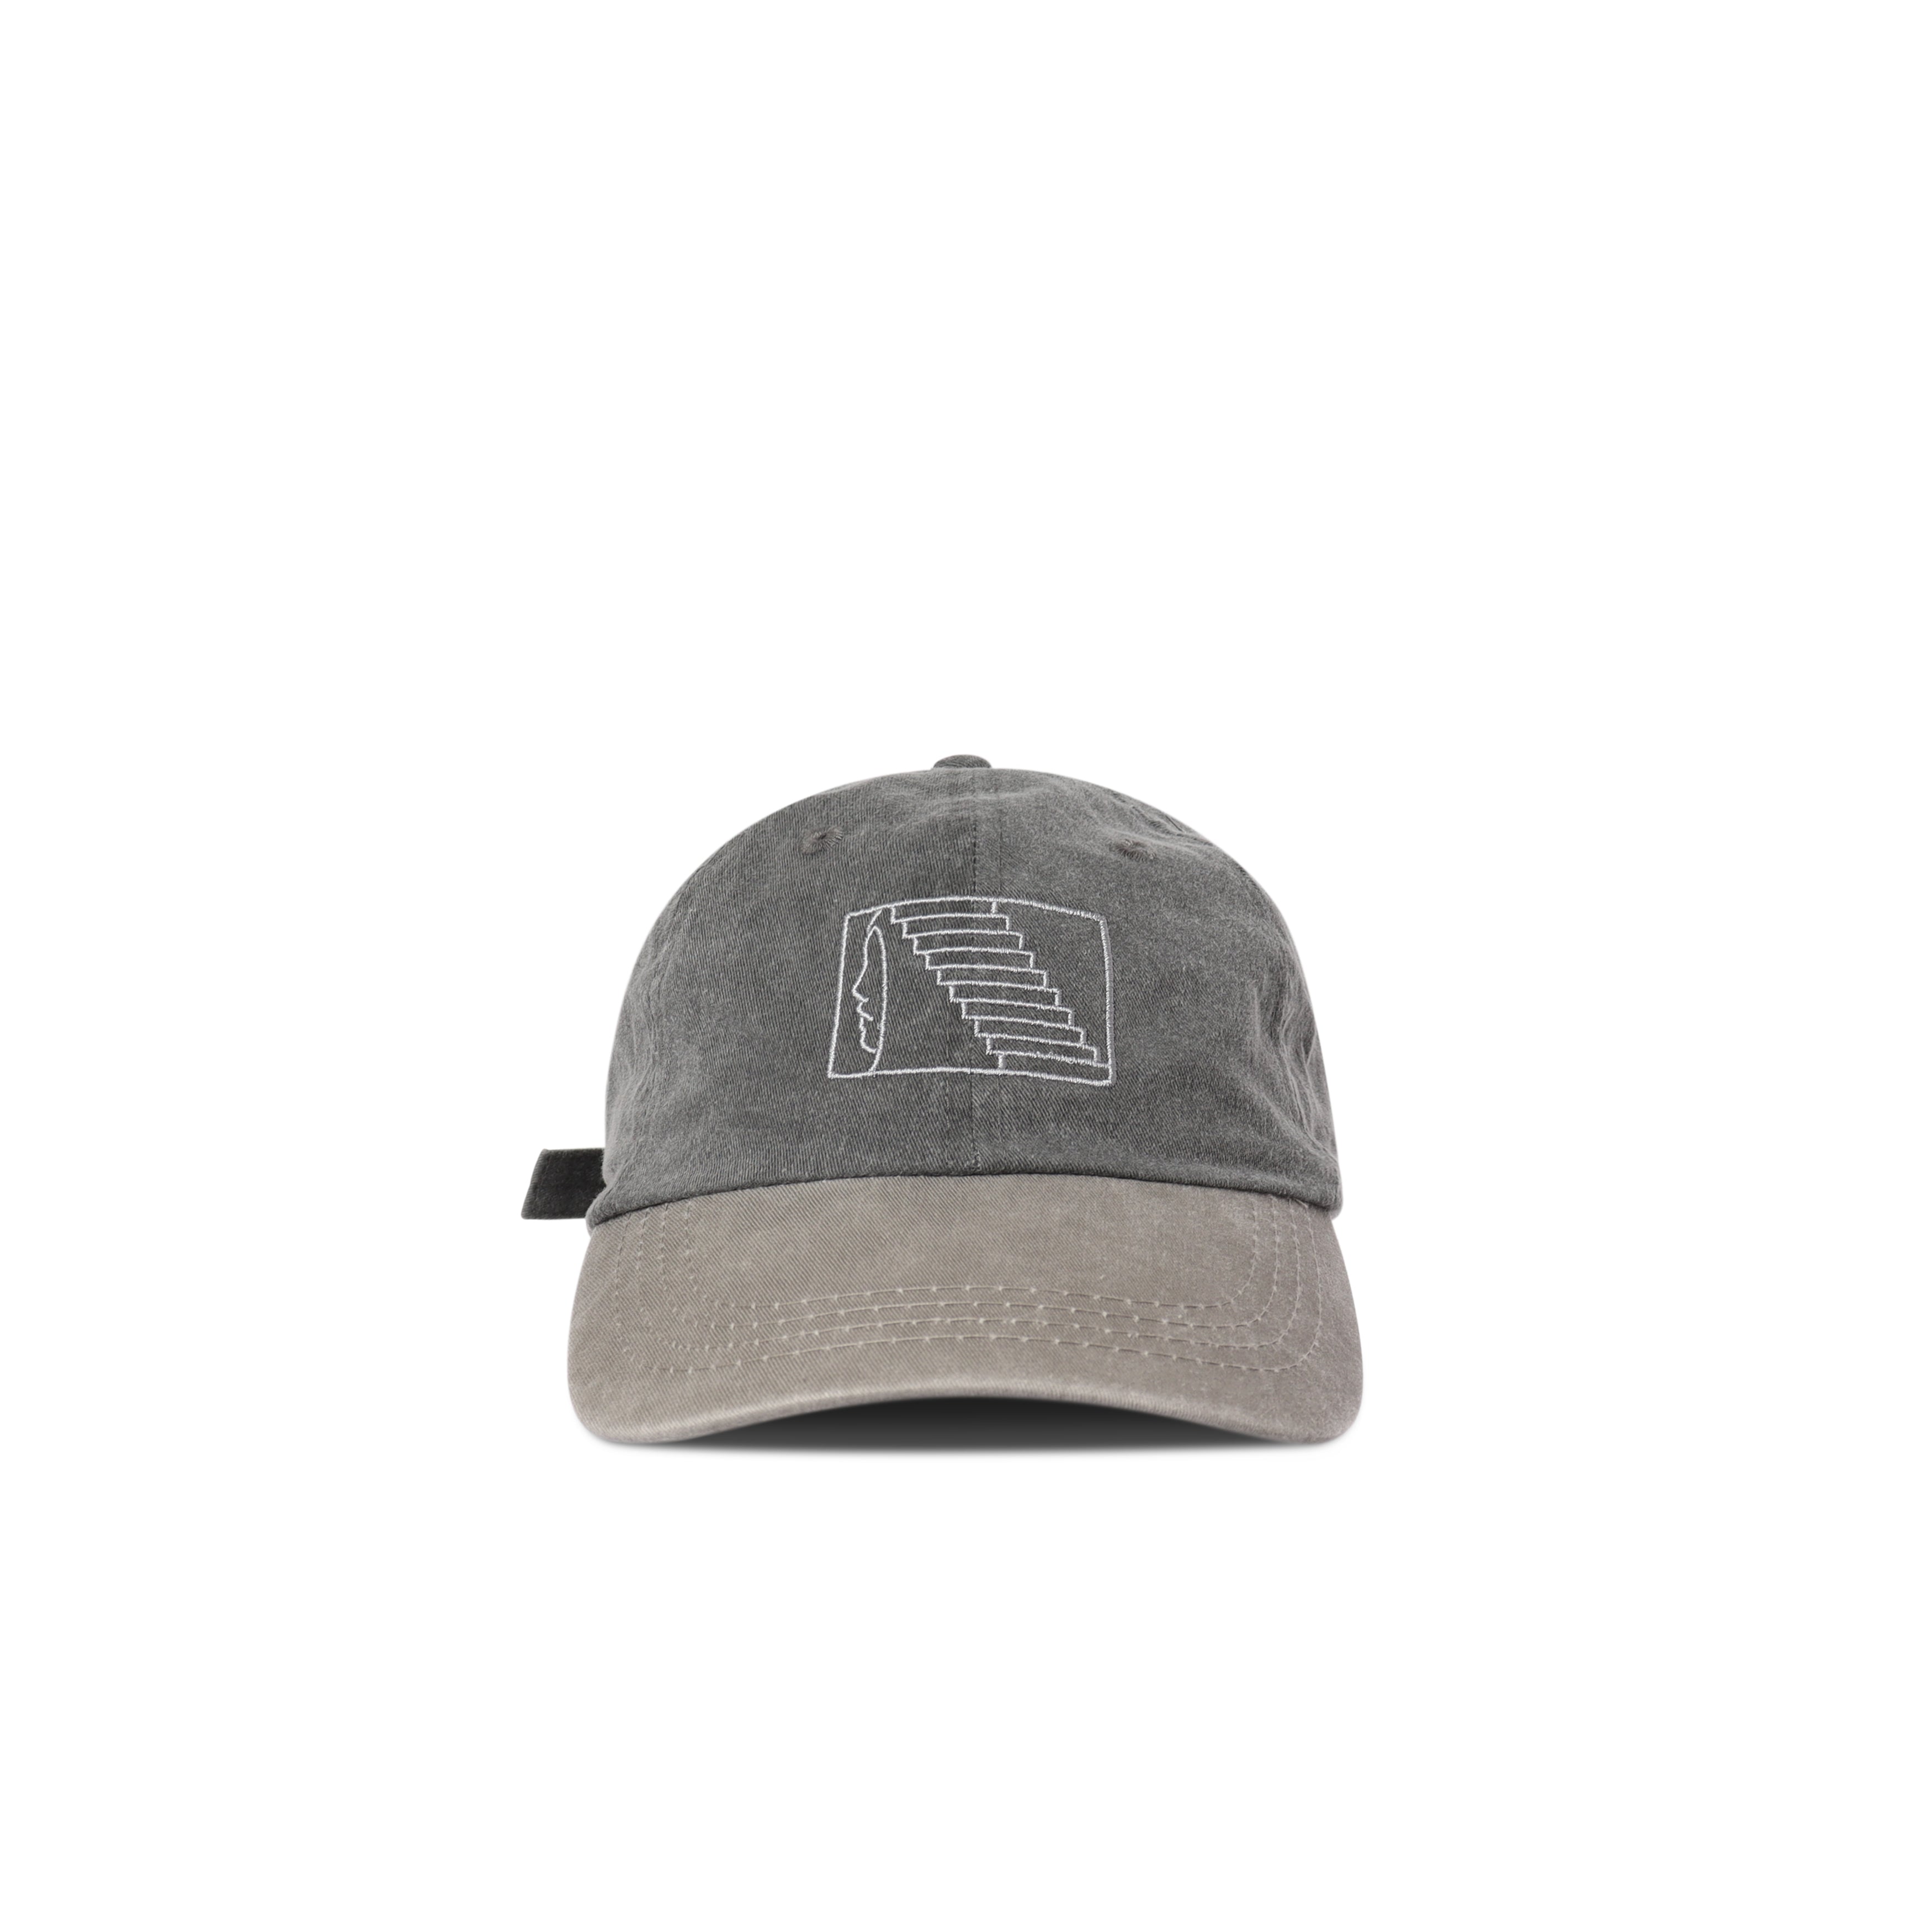 Two Tone Stairway Cap - Grey / Charcoal